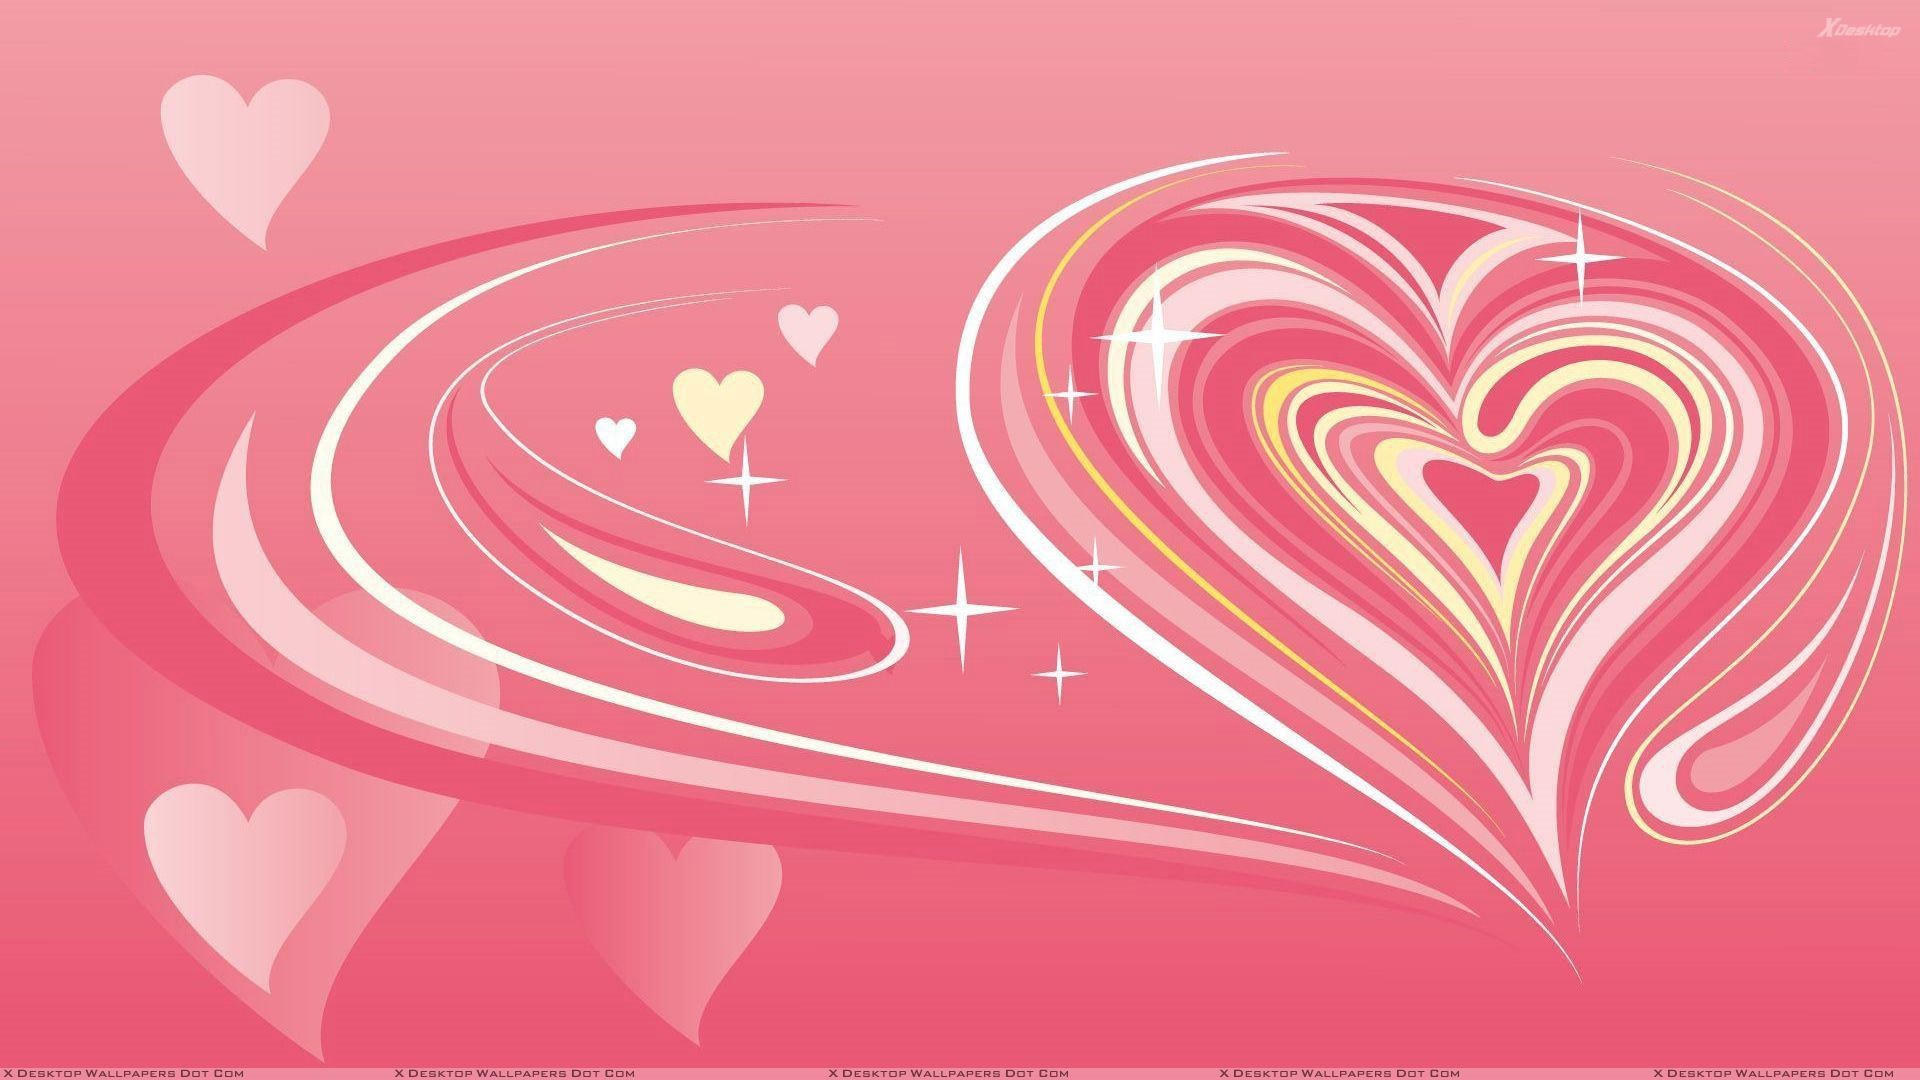 1920x1080 ... Hearts Animated Wallpaper Love Wallpaper With Pink Background 15  Wallpaper Pink Background Love With Full Hd Pics For Iphone ...